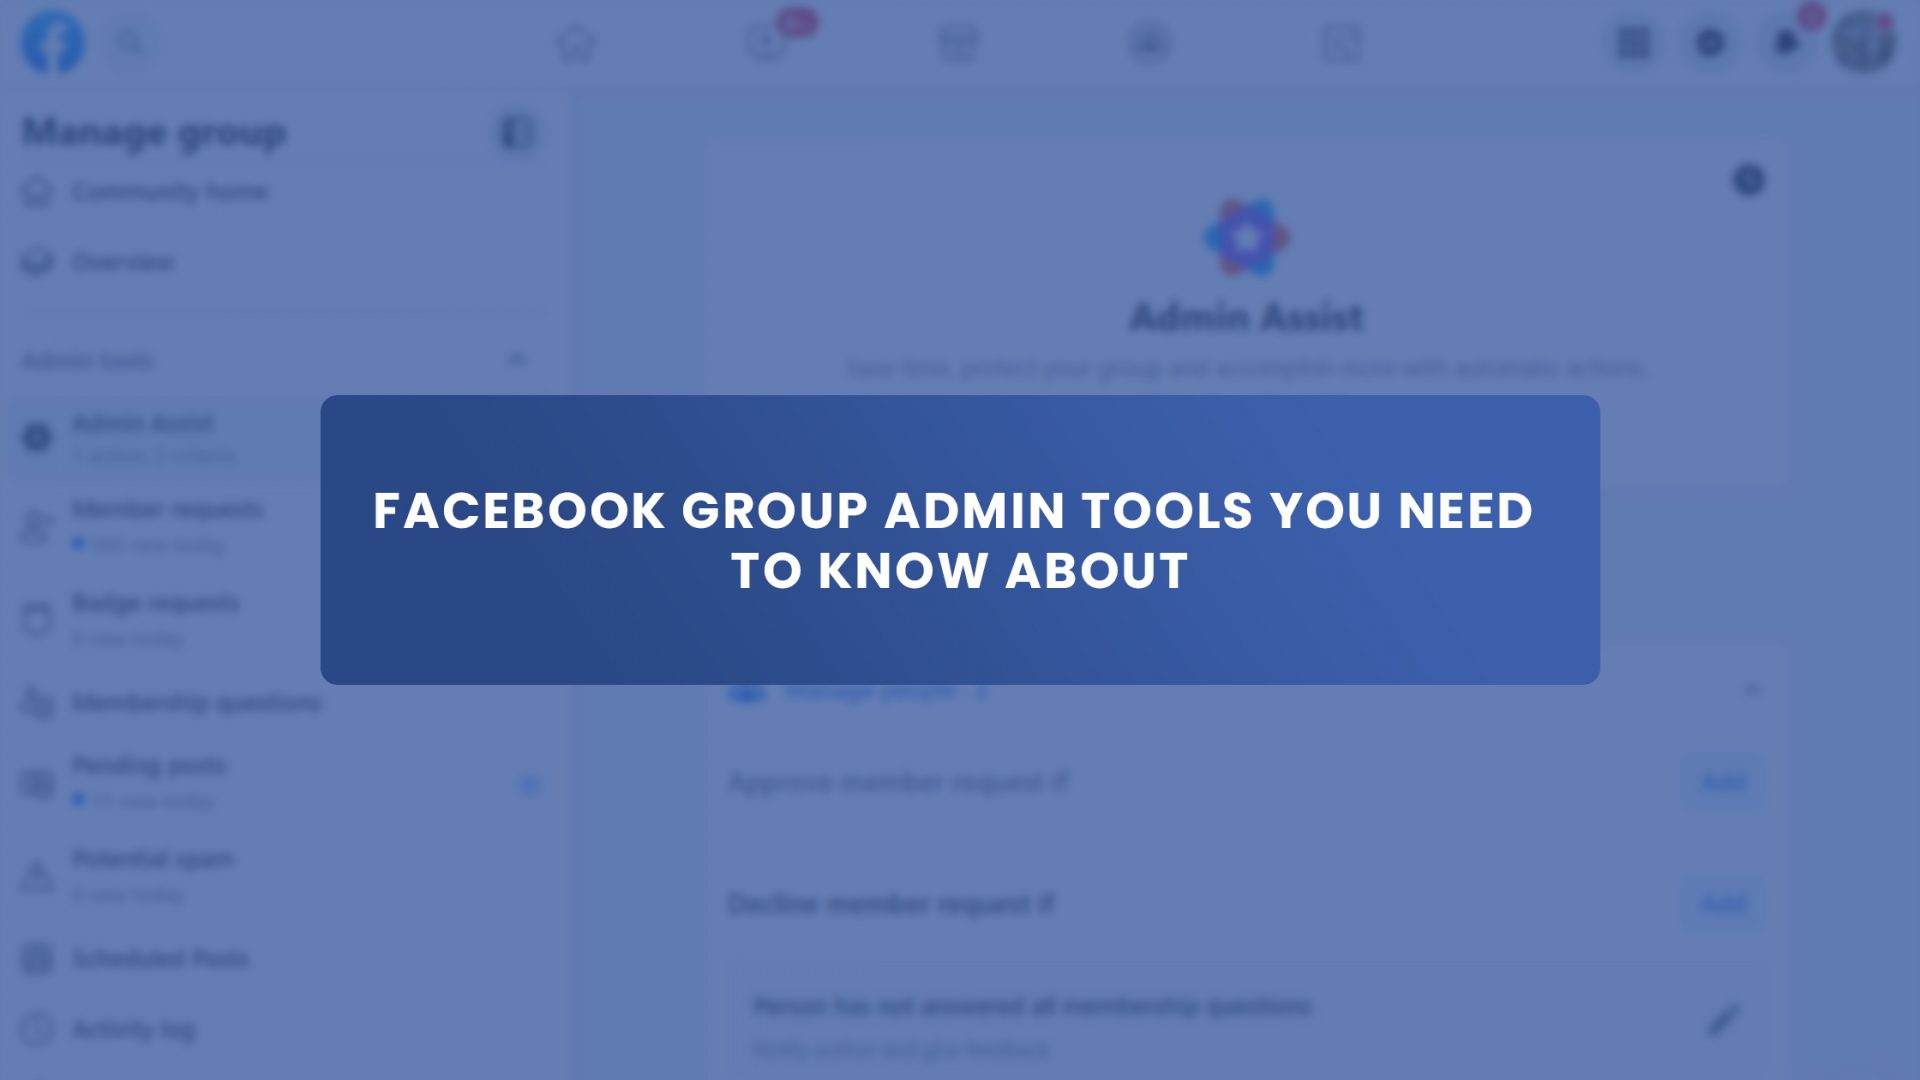 Facebook Group Admin Tools You Need to Know About